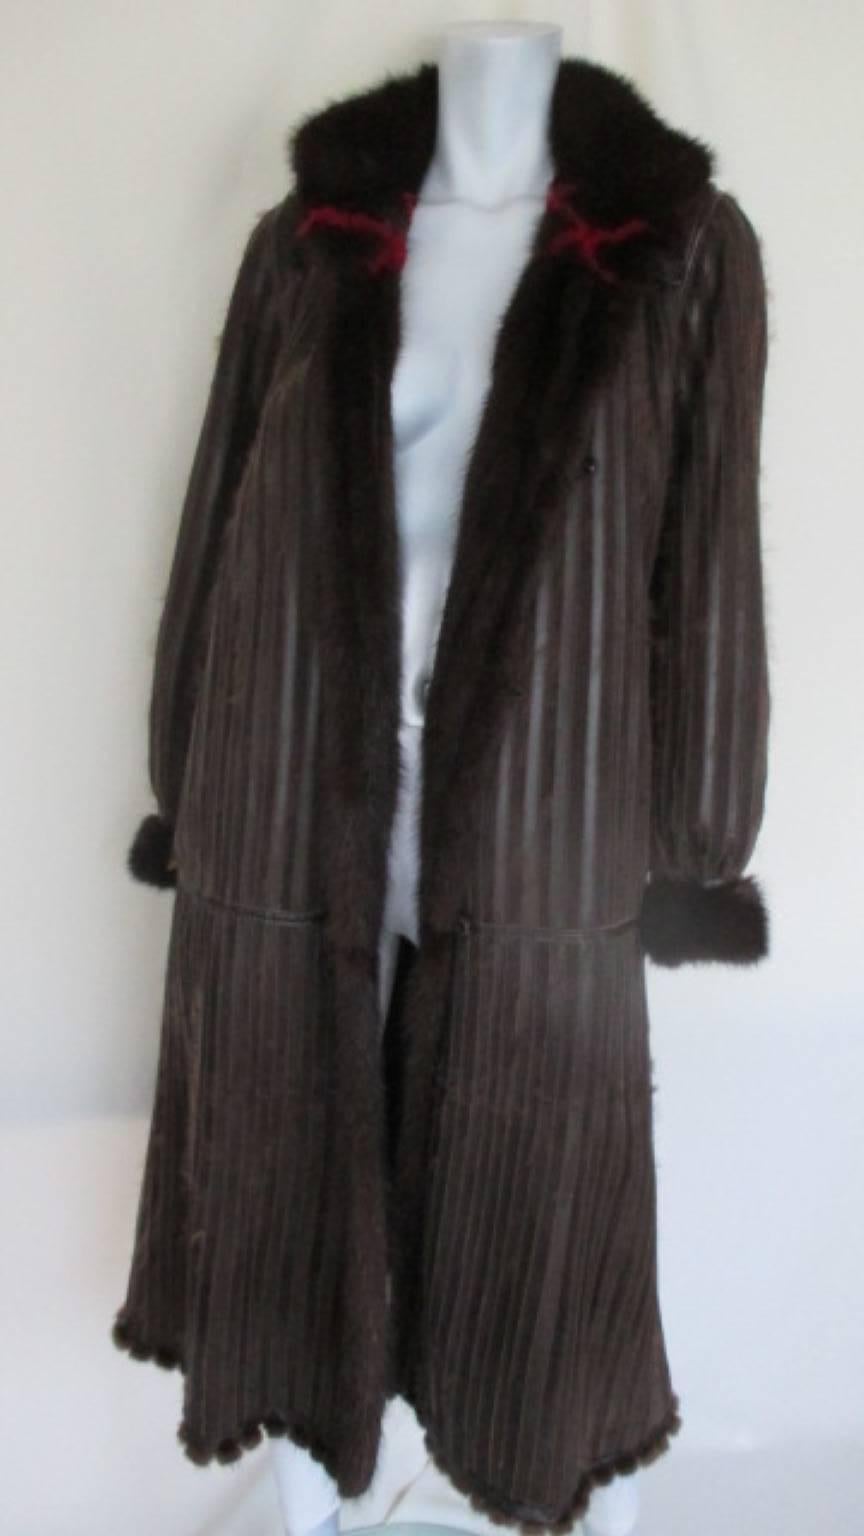 This vintage coat is made from quality soft mink, can be worn from both sides, it has 2 pockets in and out at the fur side and at the leather side.
It has 4 closing buttons.
The furrier is Tarja Niskanen from Helsinki, Finland
The colour is dark